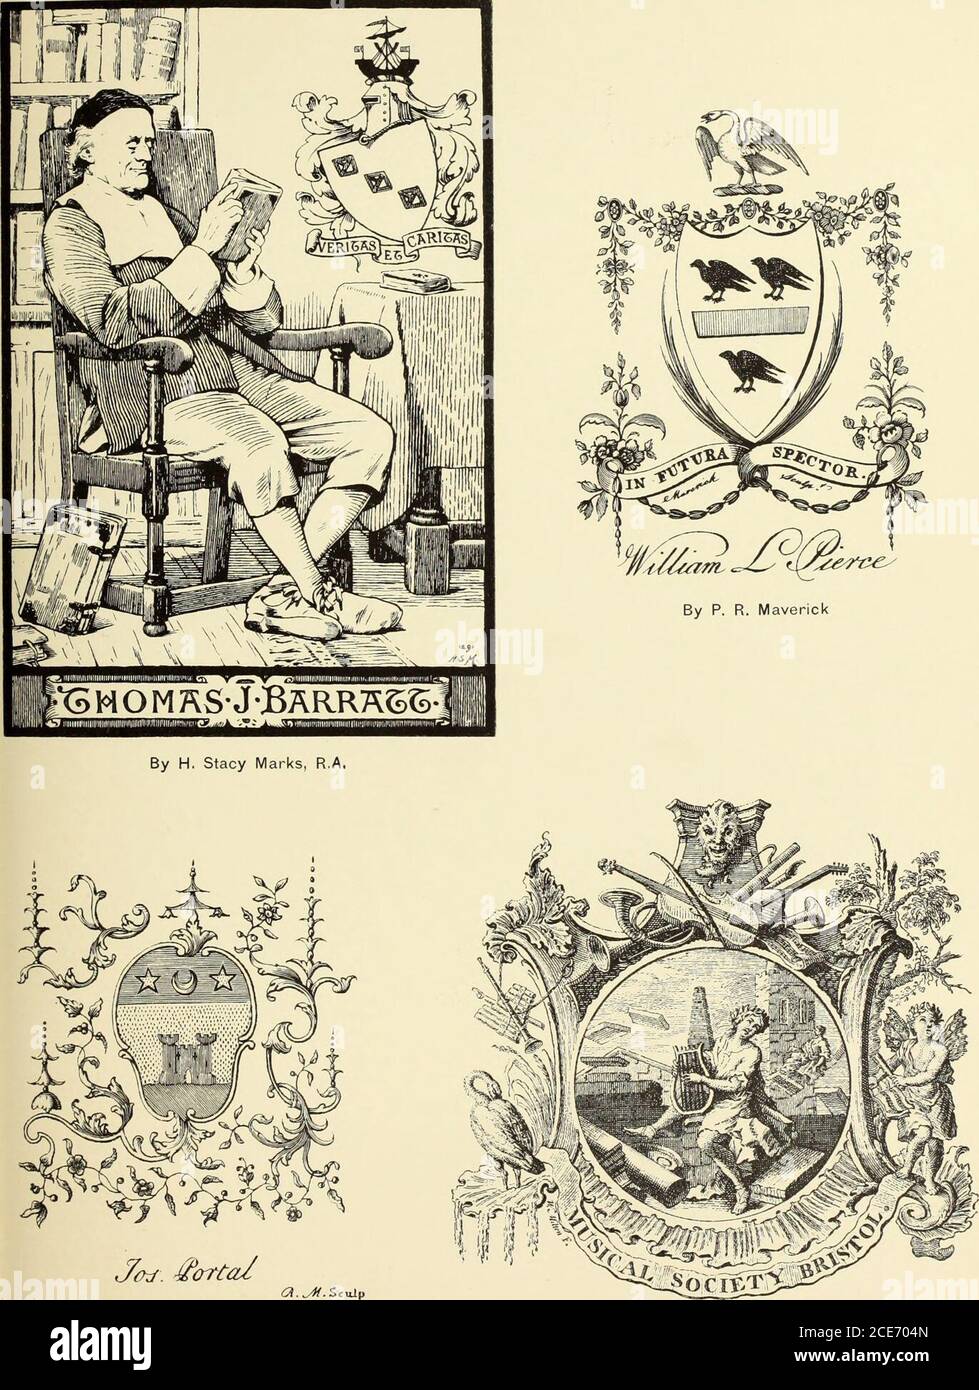 . Artists and engravers of British and American book plates : a book of reference for book plate and print collectors . ick sc.Maverick sculp. Maverick sculp.Maverick sculp.Maverick Sc.P. Maverick sc. Engr. by P. R. Maverick 65 Liberty Street Maverick Sc. Crown Street. P. Maverick Sc 1801.Maverick Sep. P. R. Maverick Sc.Maverick Sculp.Maverick Sc.Maverick Sc.Maverick Sep.Maverick Sculp.Maverick Sculp.Maverick Sc. Maverick Sculp. Maverick Sep New York.Maverick Sculp.Maverick Sculp. Maverick Sculp. Maverick Sc. Maverick Sculp New YorkMaverick SculpMaverick Sculp May sc.Phil. May 93 F. J. Mayers Stock Photo